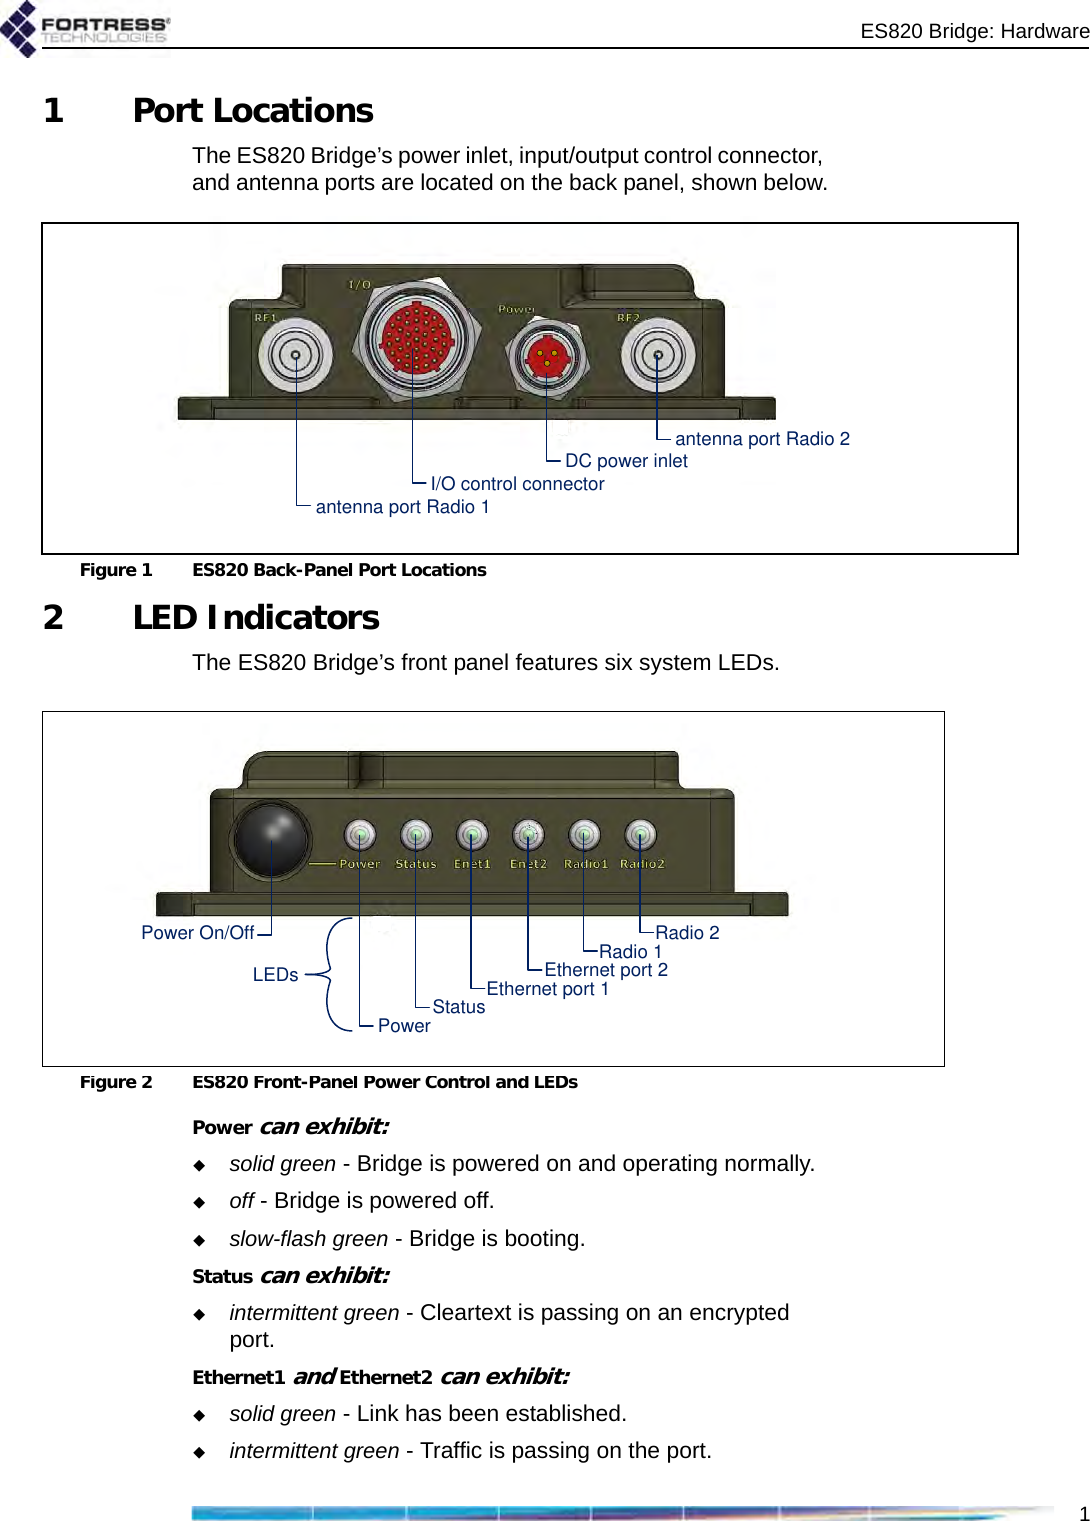 ES820 Bridge: Hardware11 Port LocationsThe ES820 Bridge’s power inlet, input/output control connector, and antenna ports are located on the back panel, shown below.Figure 1 ES820 Back-Panel Port Locations2LED IndicatorsThe ES820 Bridge’s front panel features six system LEDs.Figure 2 ES820 Front-Panel Power Control and LEDsPower can exhibit:solid green - Bridge is powered on and operating normally.off - Bridge is powered off.slow-flash green - Bridge is booting.Status can exhibit:intermittent green - Cleartext is passing on an encrypted port.Ethernet1 and Ethernet2 can exhibit:solid green - Link has been established.intermittent green - Traffic is passing on the port.antenna port Radio 1antenna port Radio 2DC power inletI/O control connectorRadio 2Radio 1Ethernet port 1Ethernet port 2StatusPowerPower On/OffLEDs